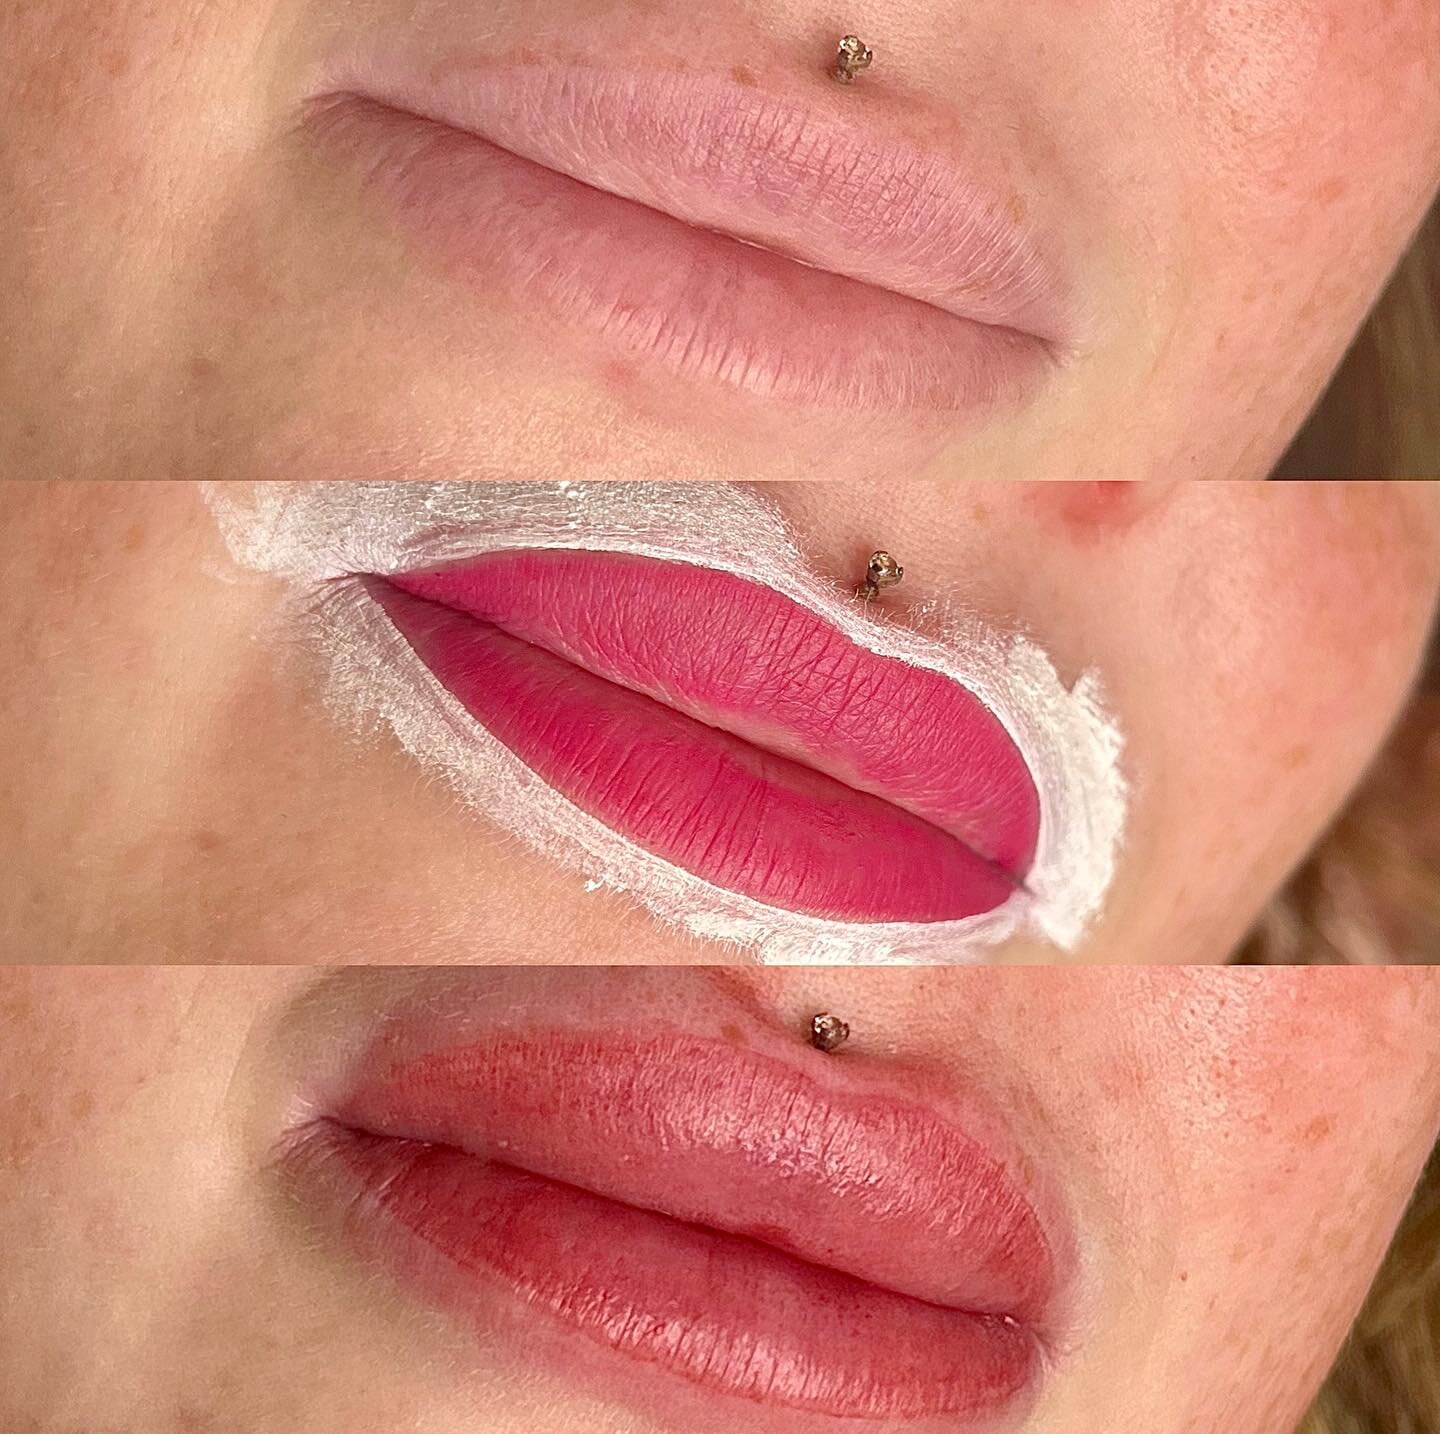 Fresh Lip Tattoo 🥰 Before, Pre Draw and right After.
Adding colour and definition back to these lips! A little bit of swelling (completely normal). Can&rsquo;t wait to se them healed! 

&mdash;&mdash;&mdash;&mdash;&mdash;&mdash;&mdash;&mdash;&mdash;